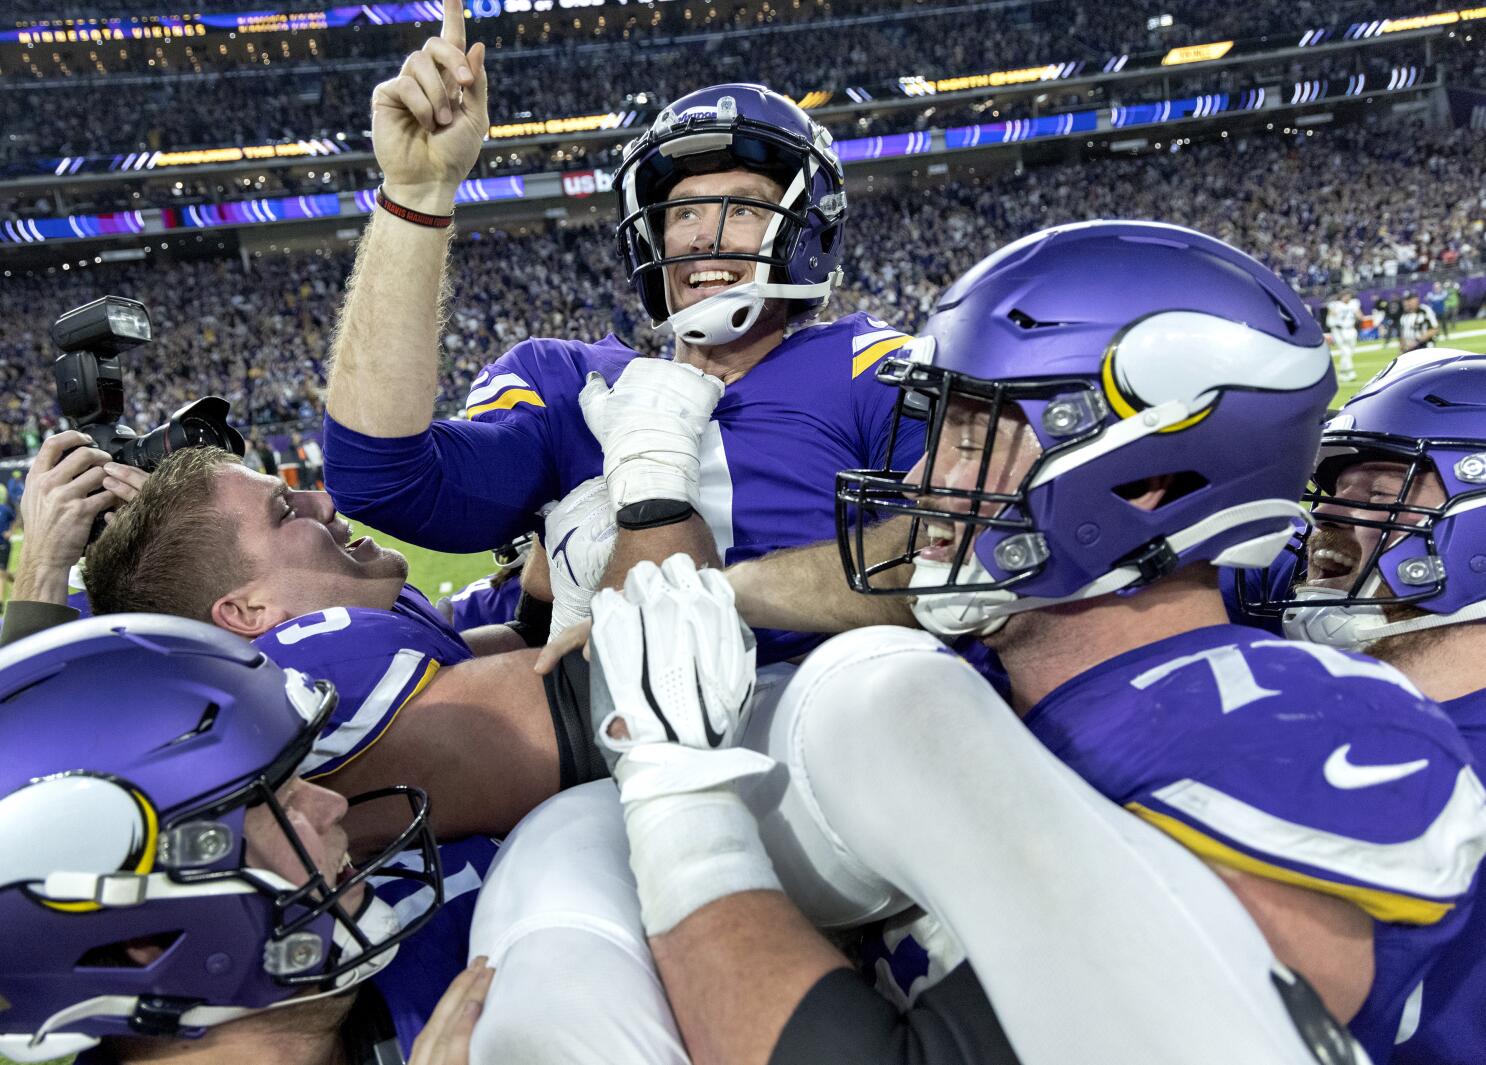 Vikings make biggest comeback in NFL history with OT win over Colts